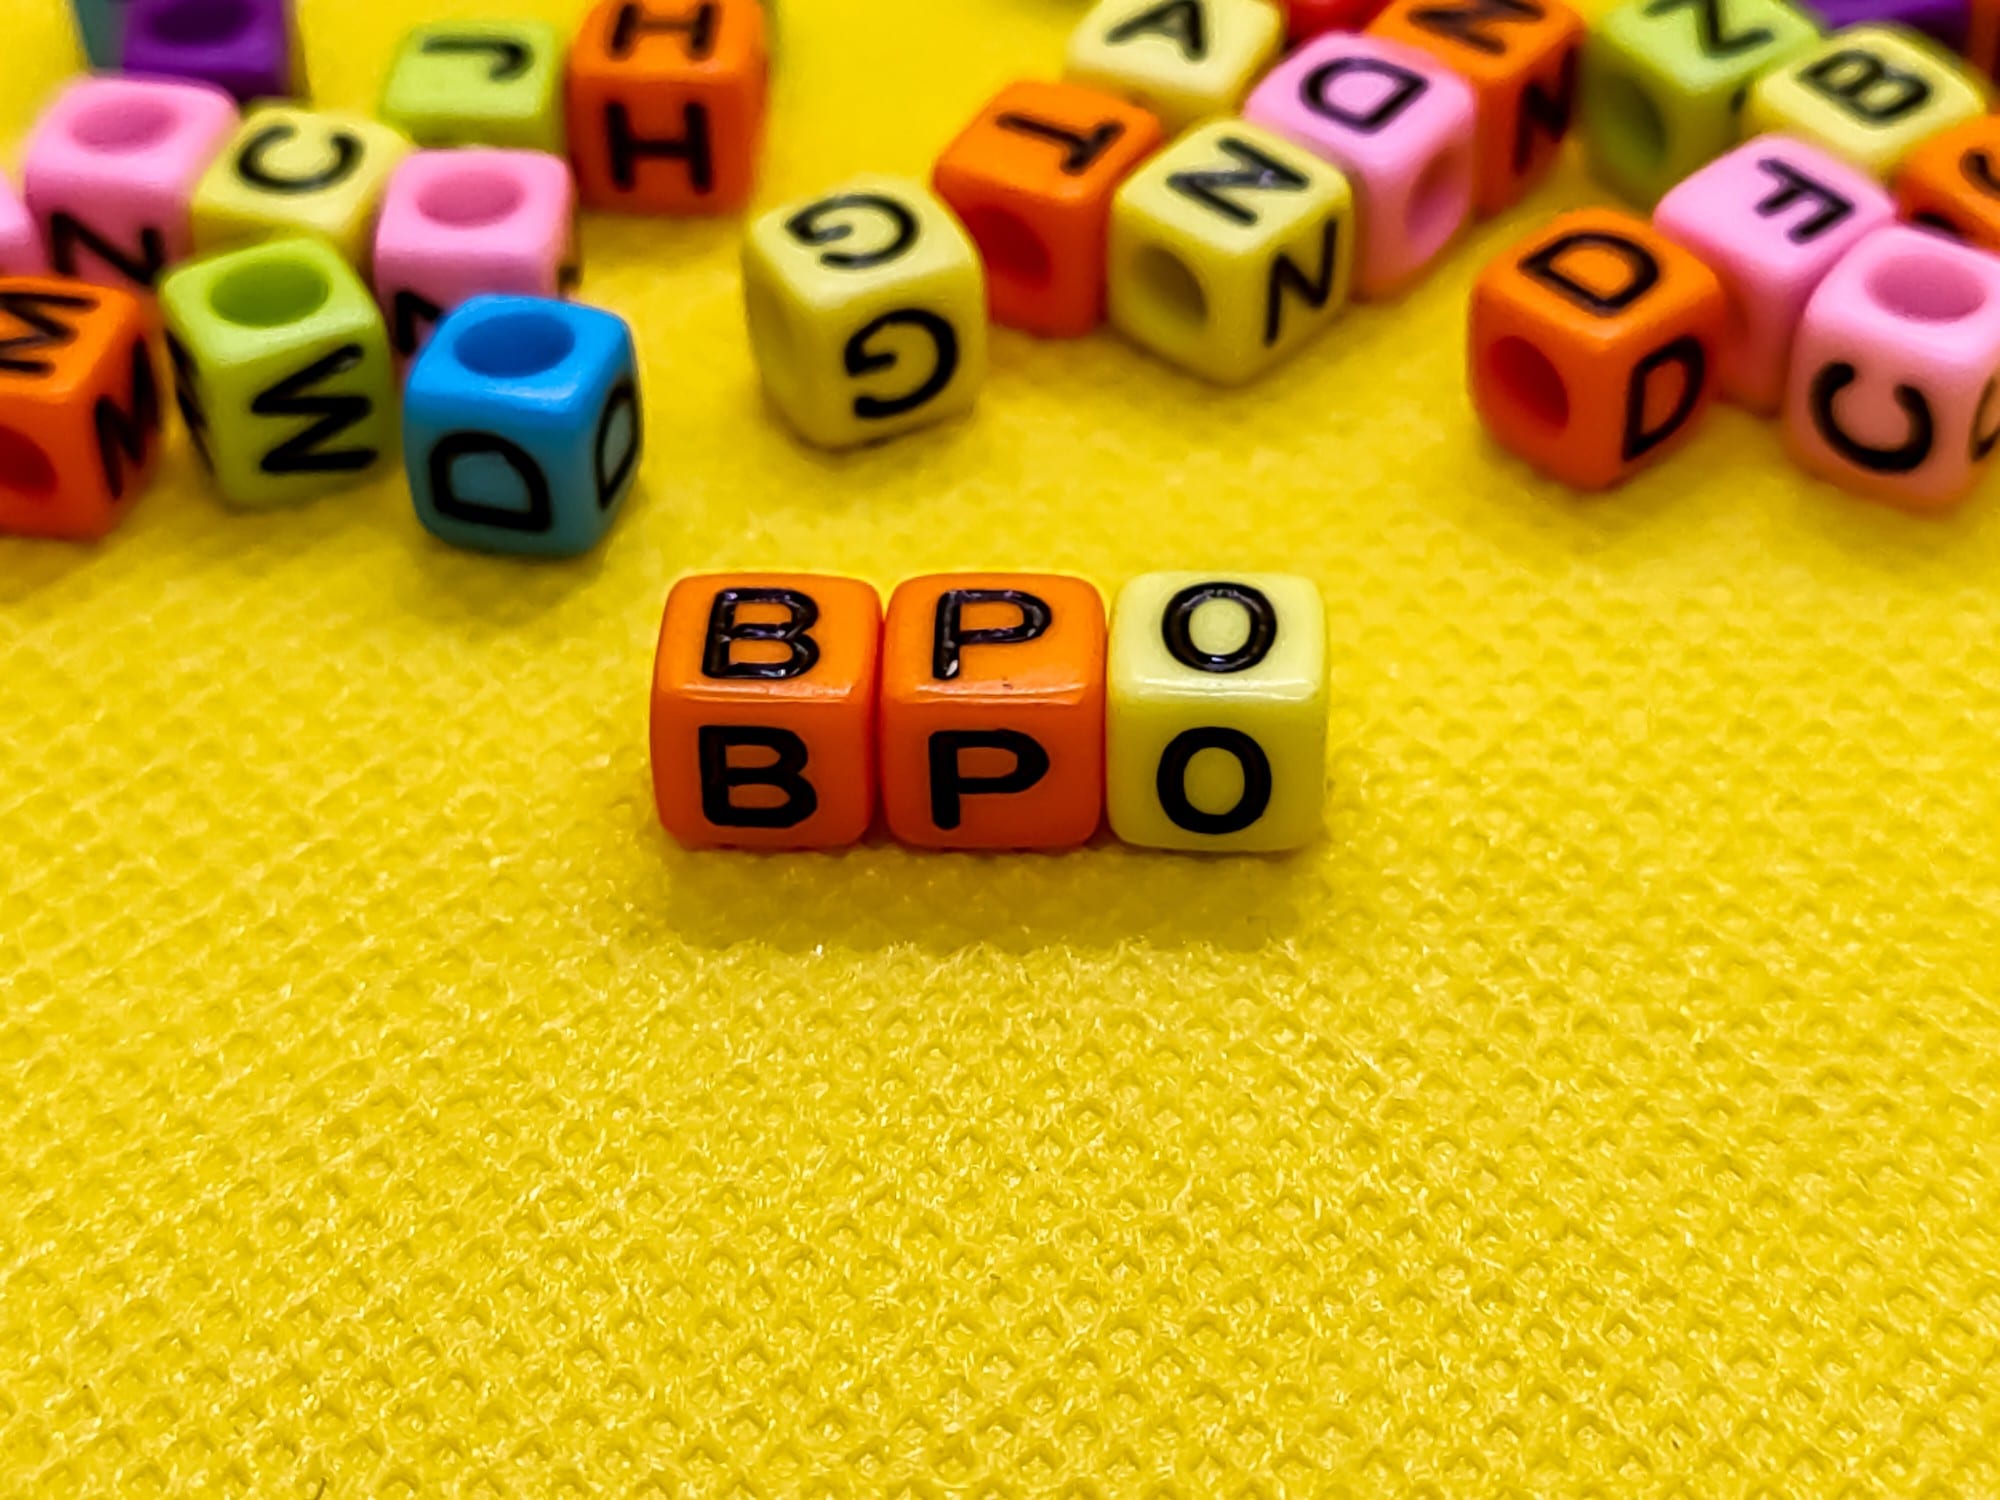 A dice of letters forming BPO